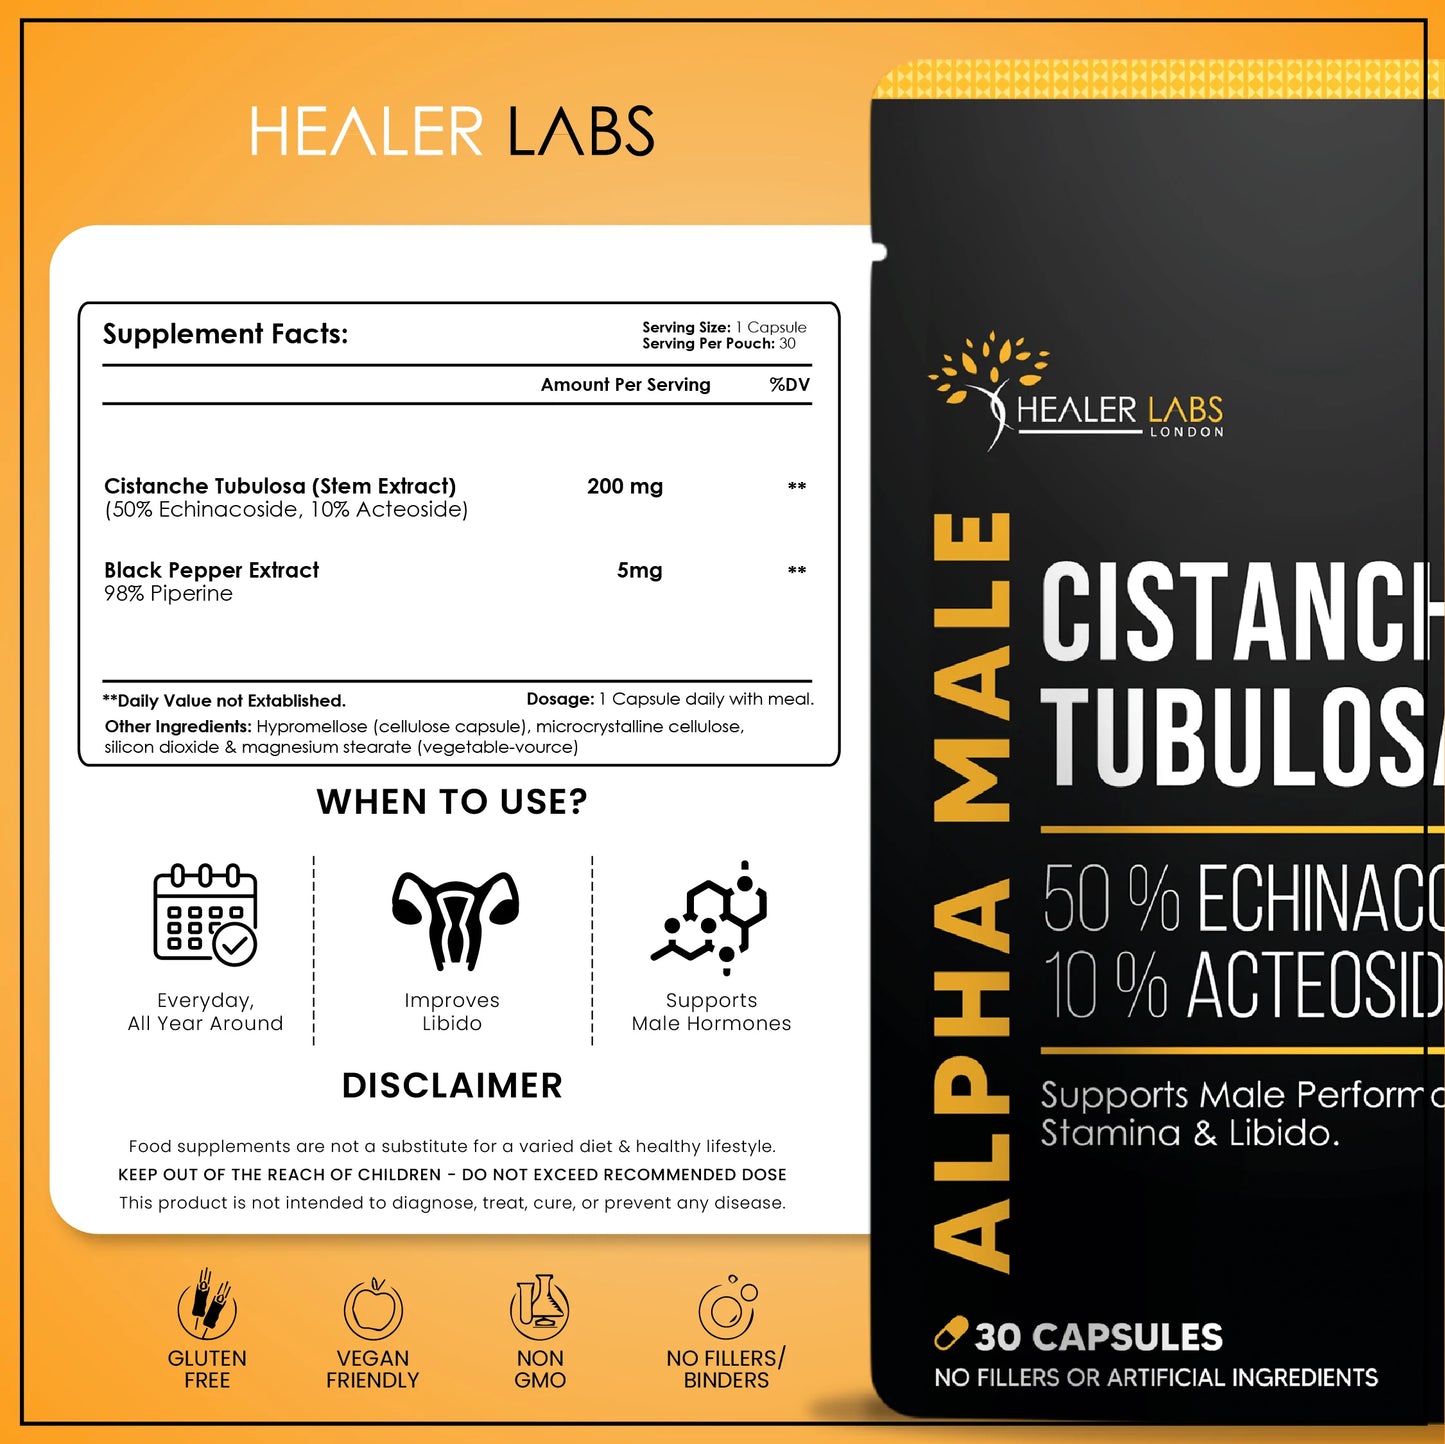  Healer Labs - Organic Cistanche Tubulosa 50% Echinacoside + 10% Acetosides - The Beauty Corp.